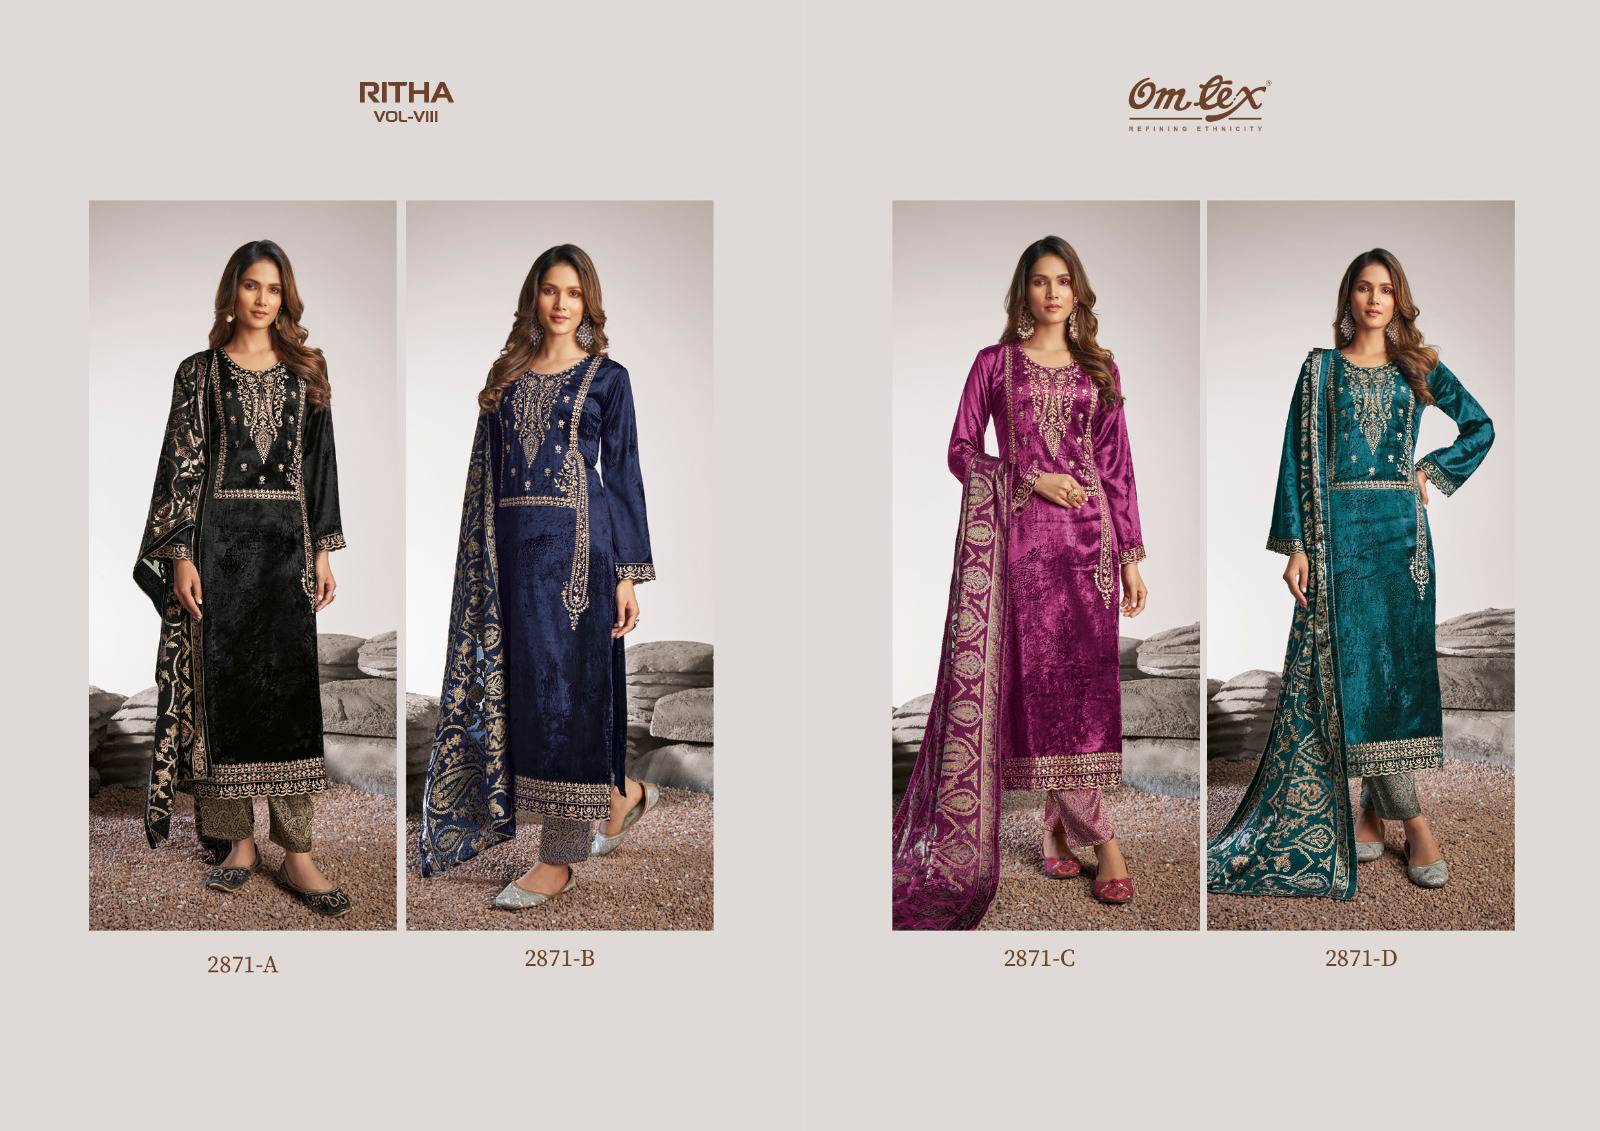 Ritha Vol-7 By Om Tex 2871-A To 2871-D Series Designer Festive Suits Beautiful Fancy Stylish Colorful Party Wear & Occasional Wear Pure Viscose Velvet With Embroidery Dresses At Wholesale Price